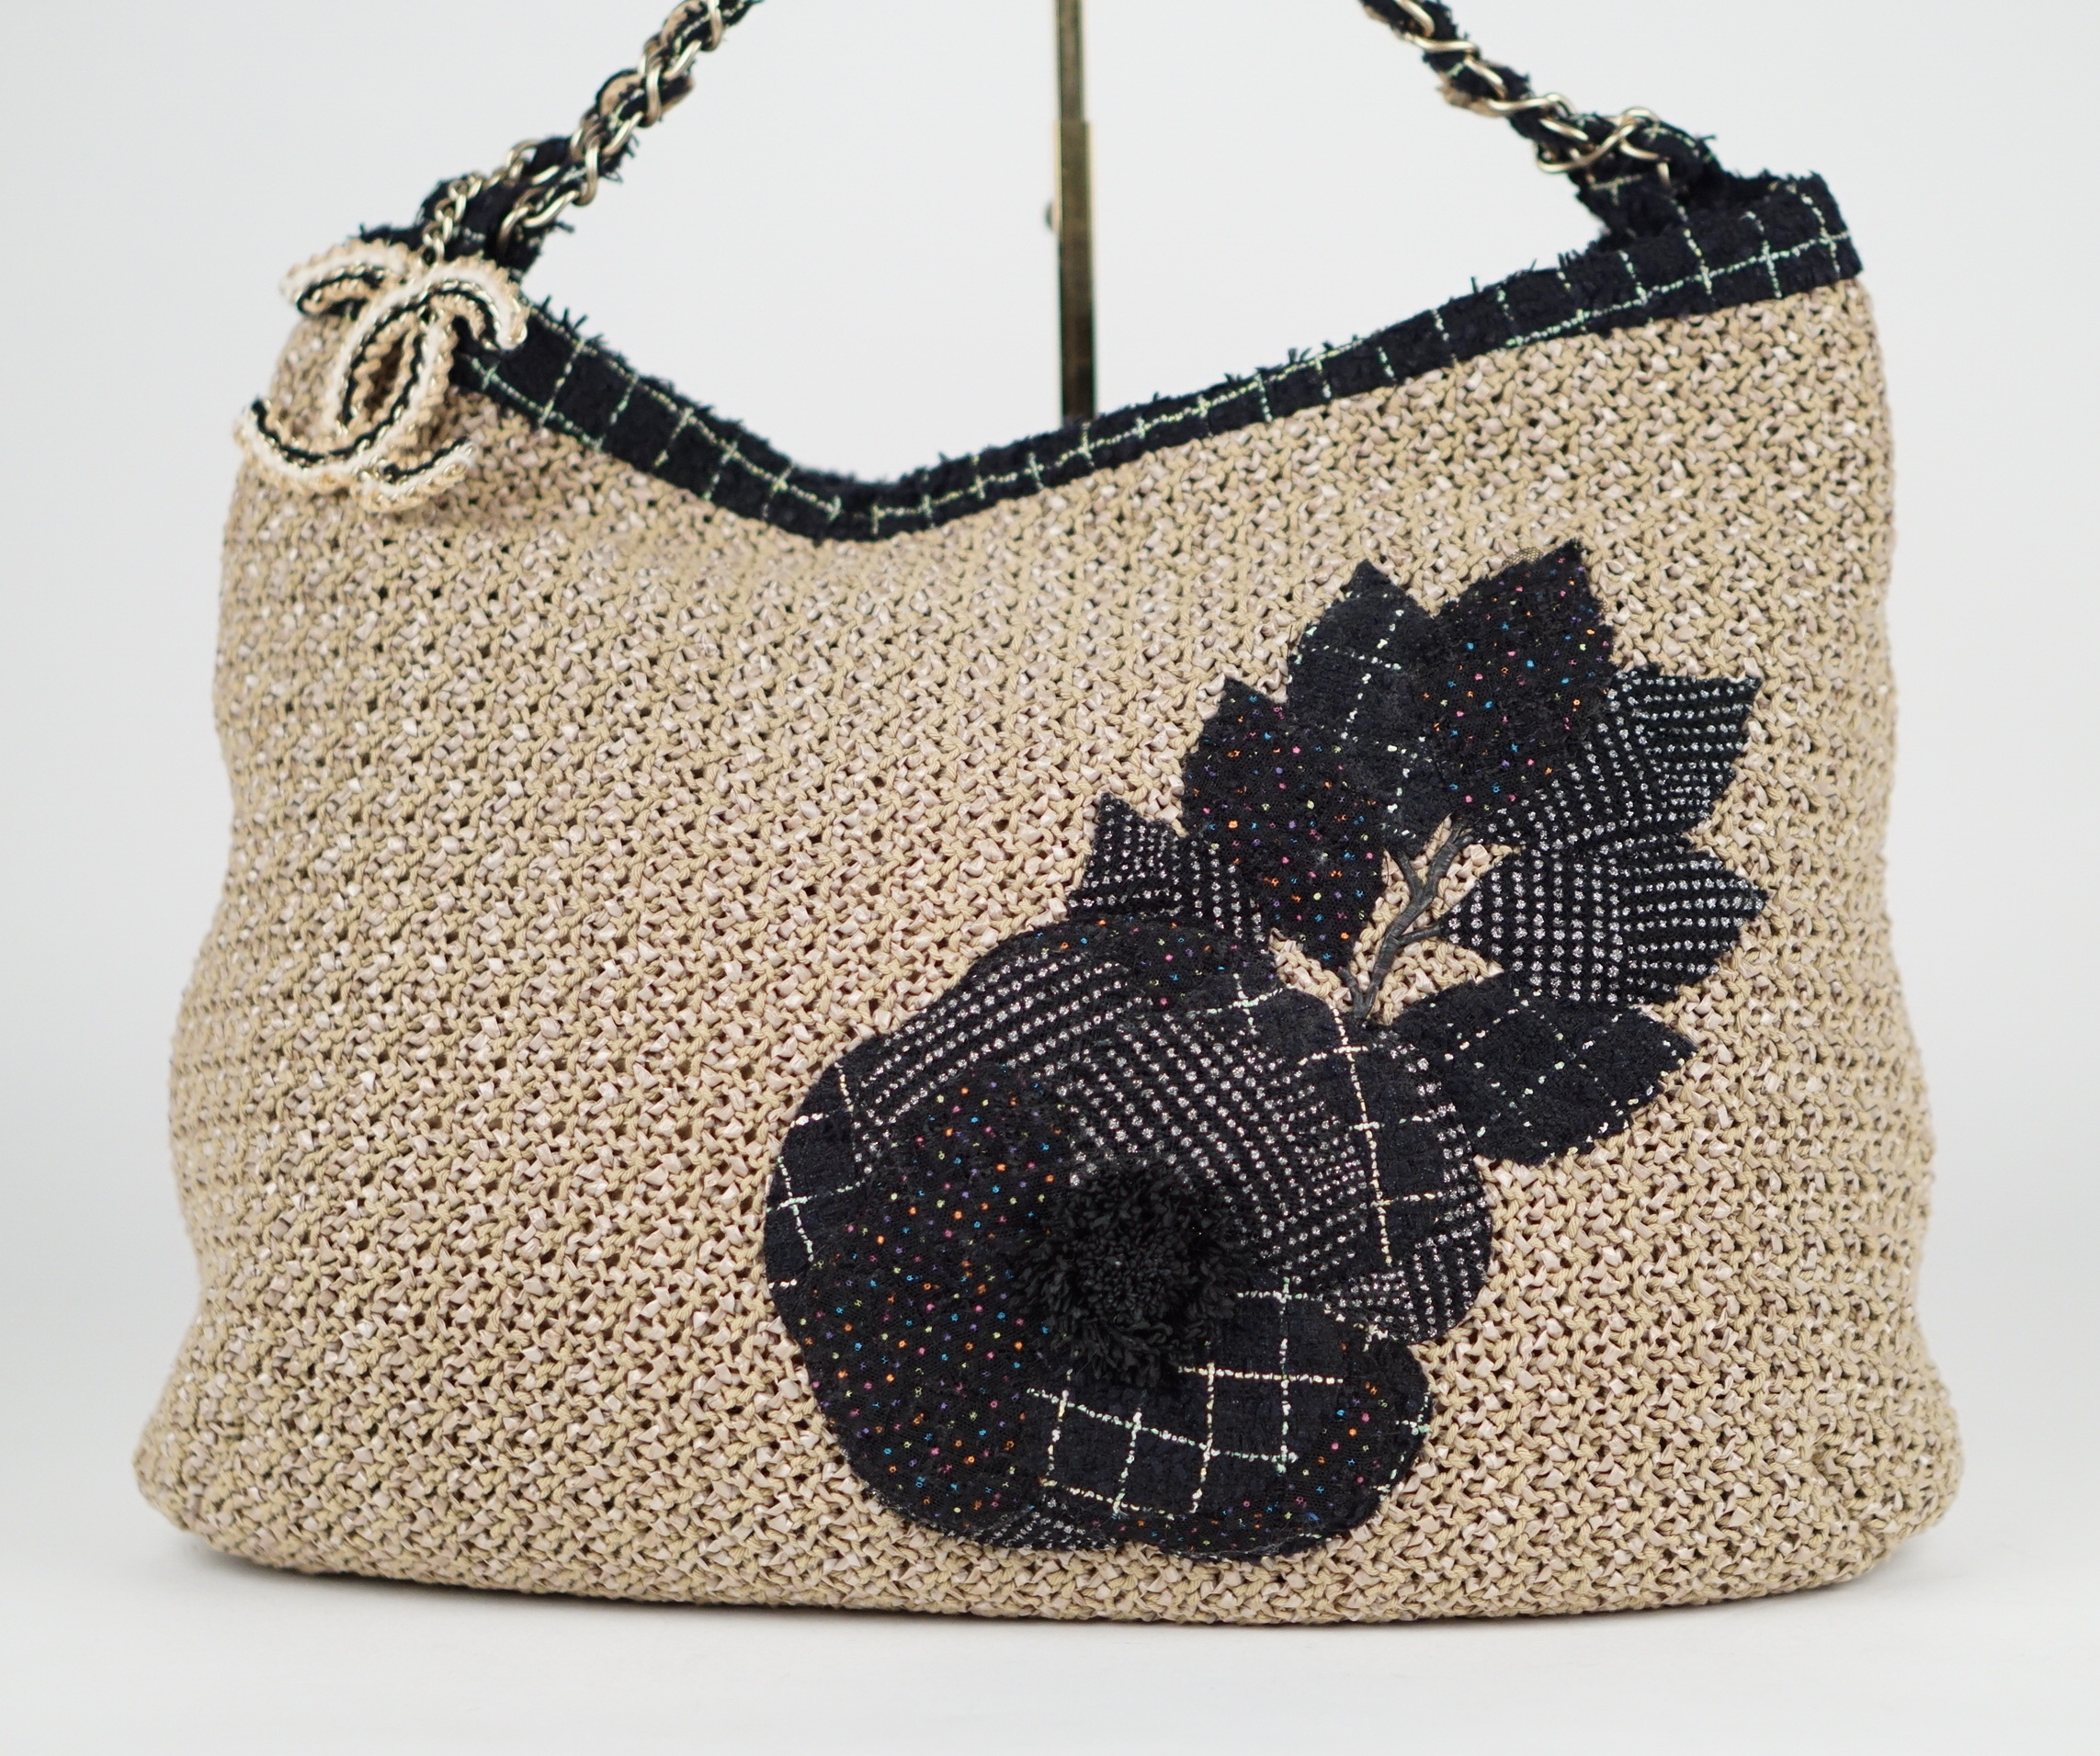 Coco Country Camellia Woven Straw Tote Bag Spring Summer 2010 